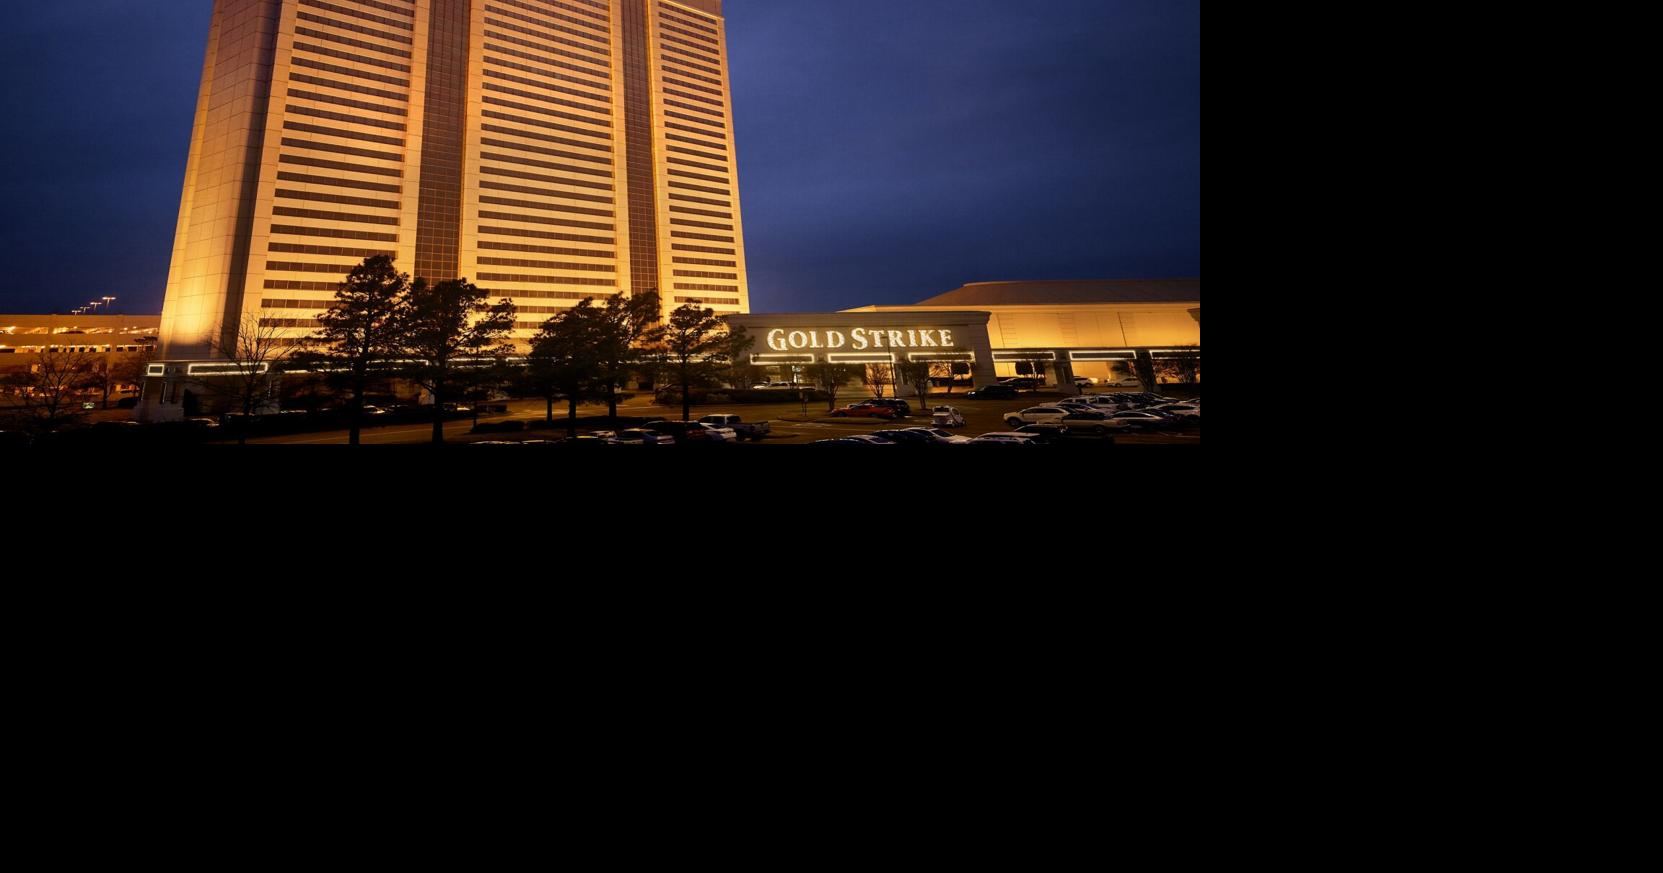 CNB reaches agreement to purchase operations of Gold Strike Tunica, Money